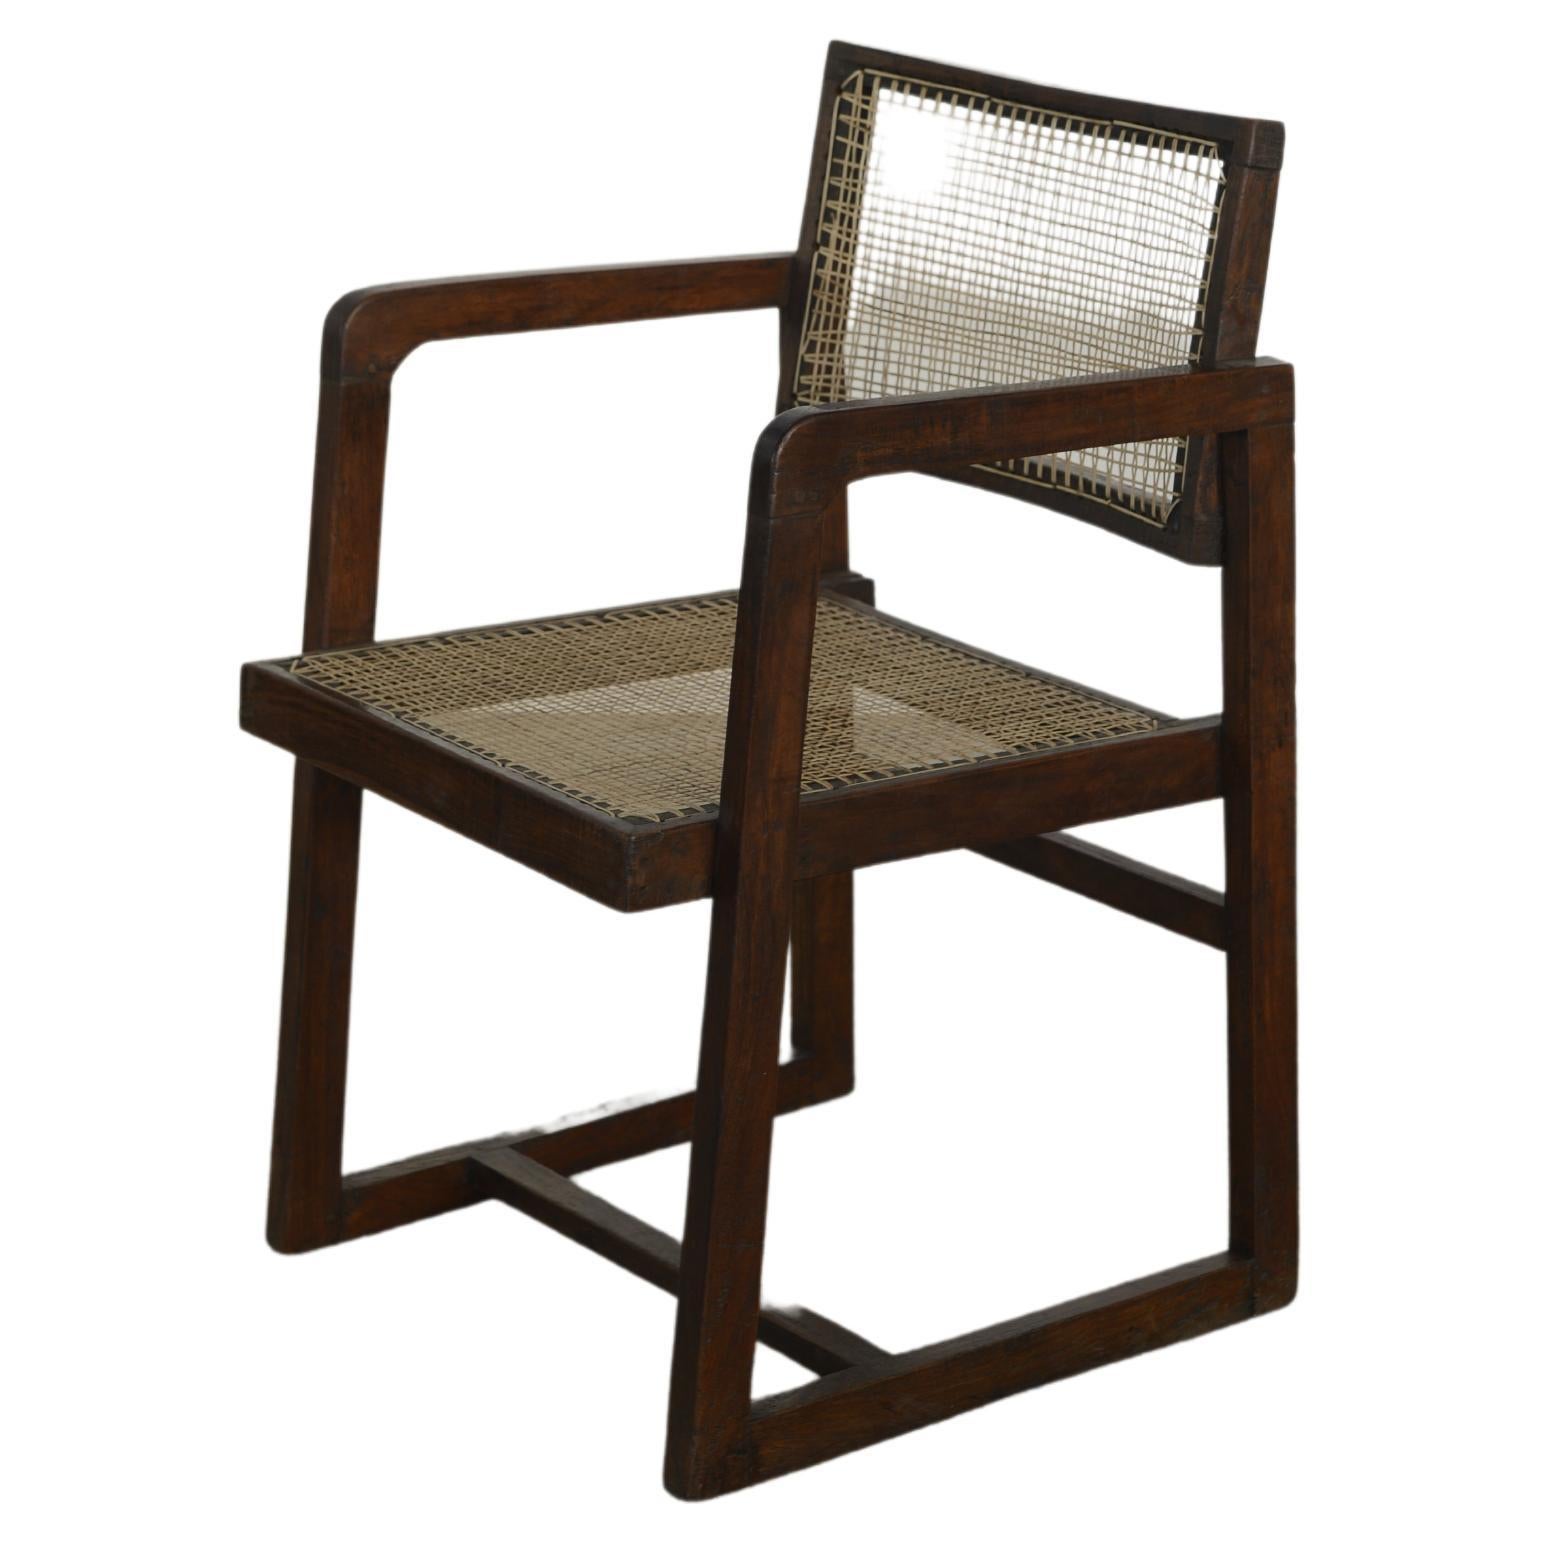 Pierre Jeanneret PJ-SI-53-A Box Chair / Authentic Mid-Century Modern Chandigarh 